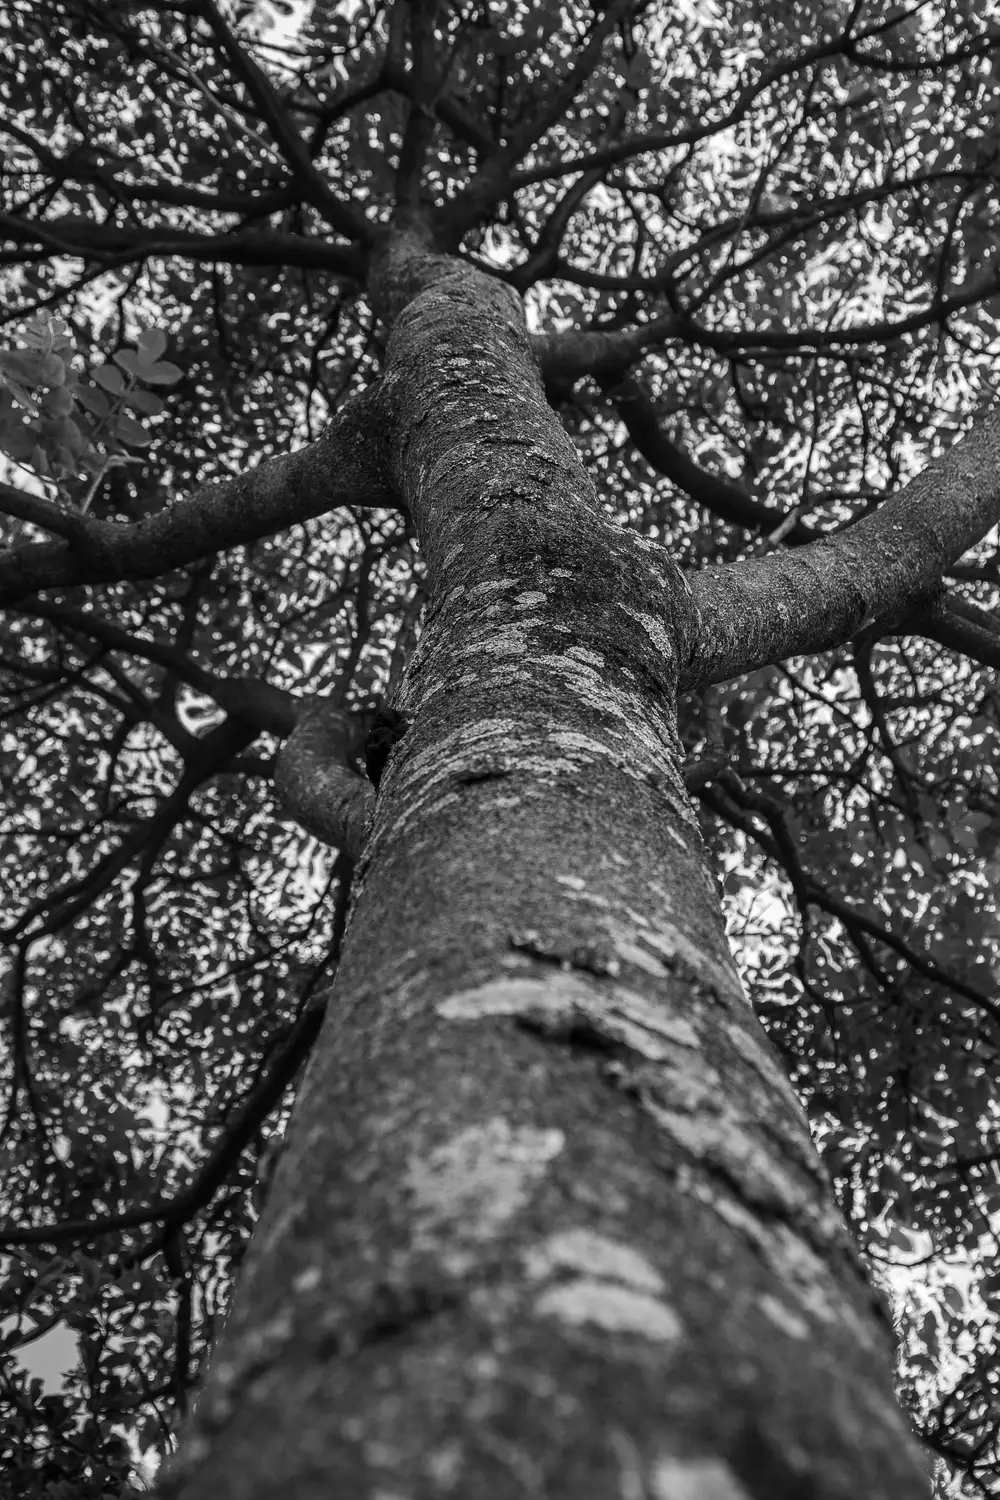 Bottom up view of a tree